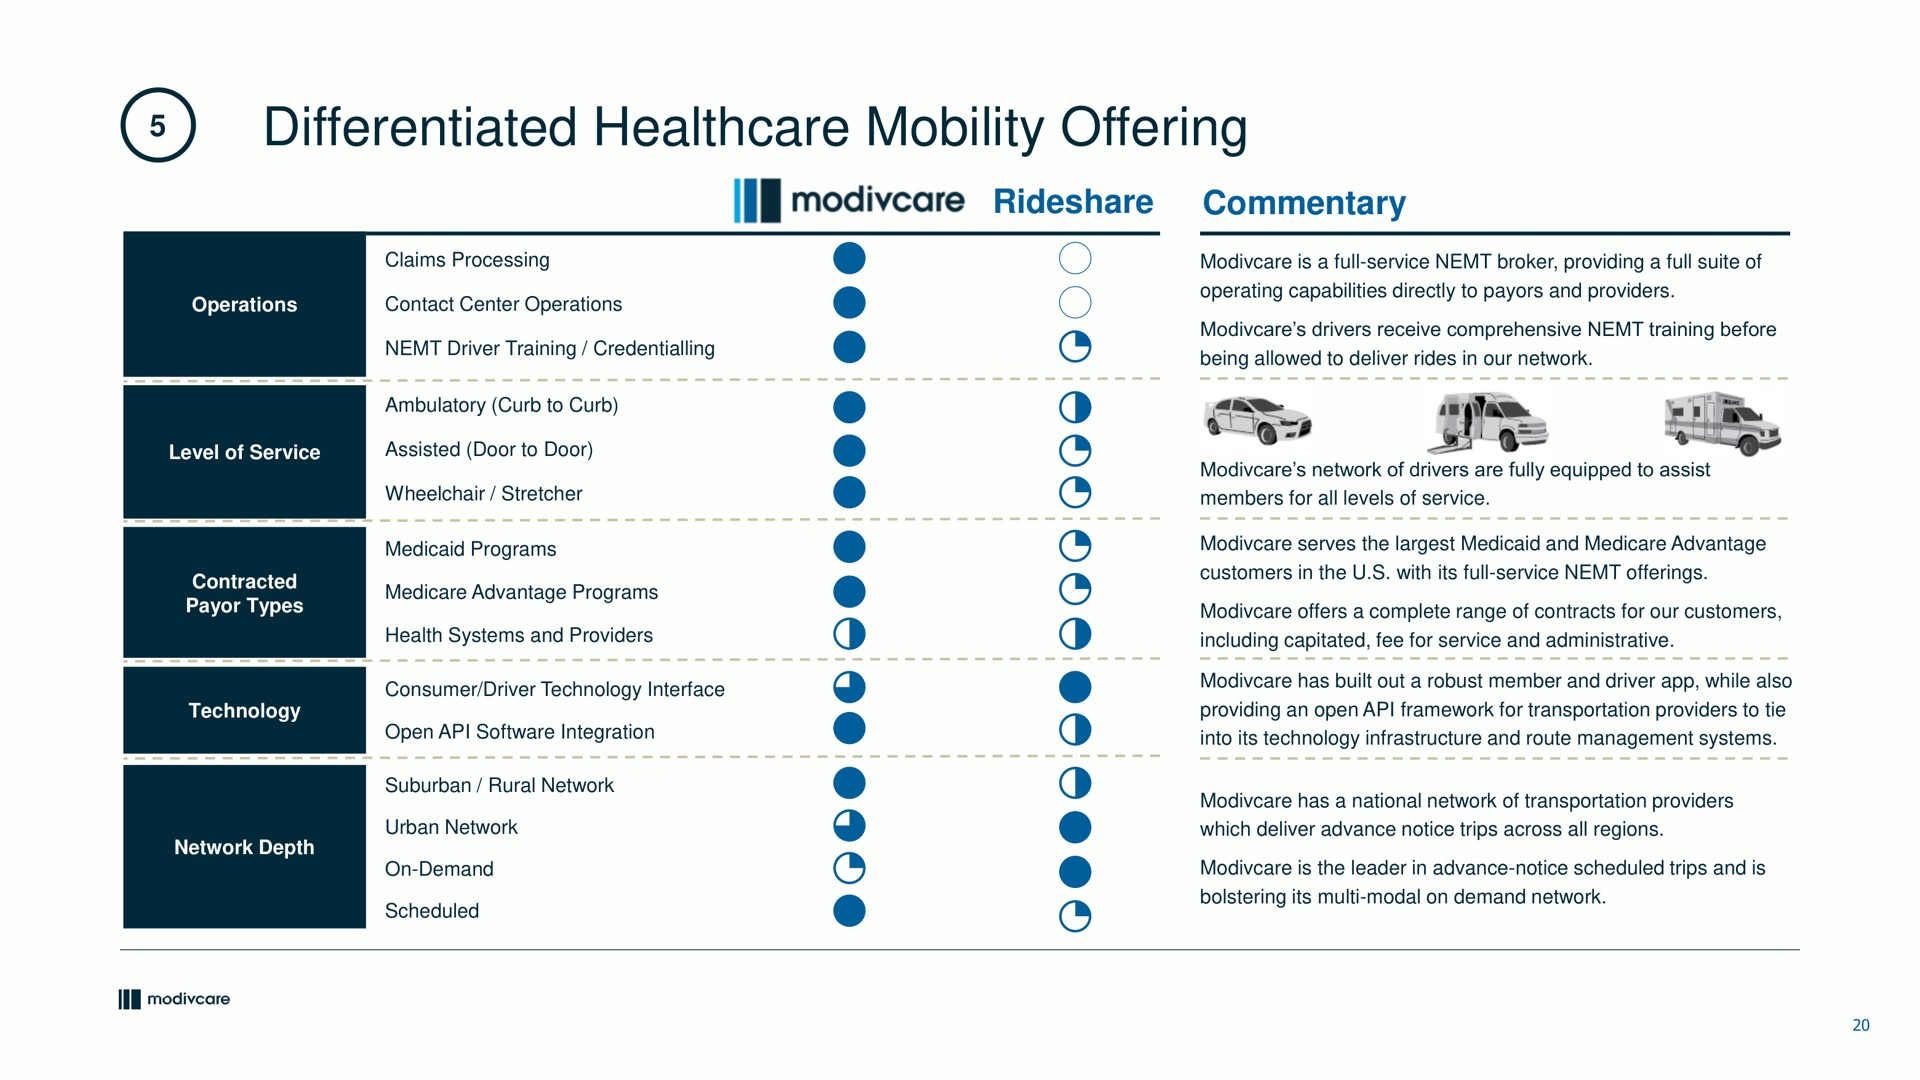 differentiated mobility offering commentary ate | ModivCare